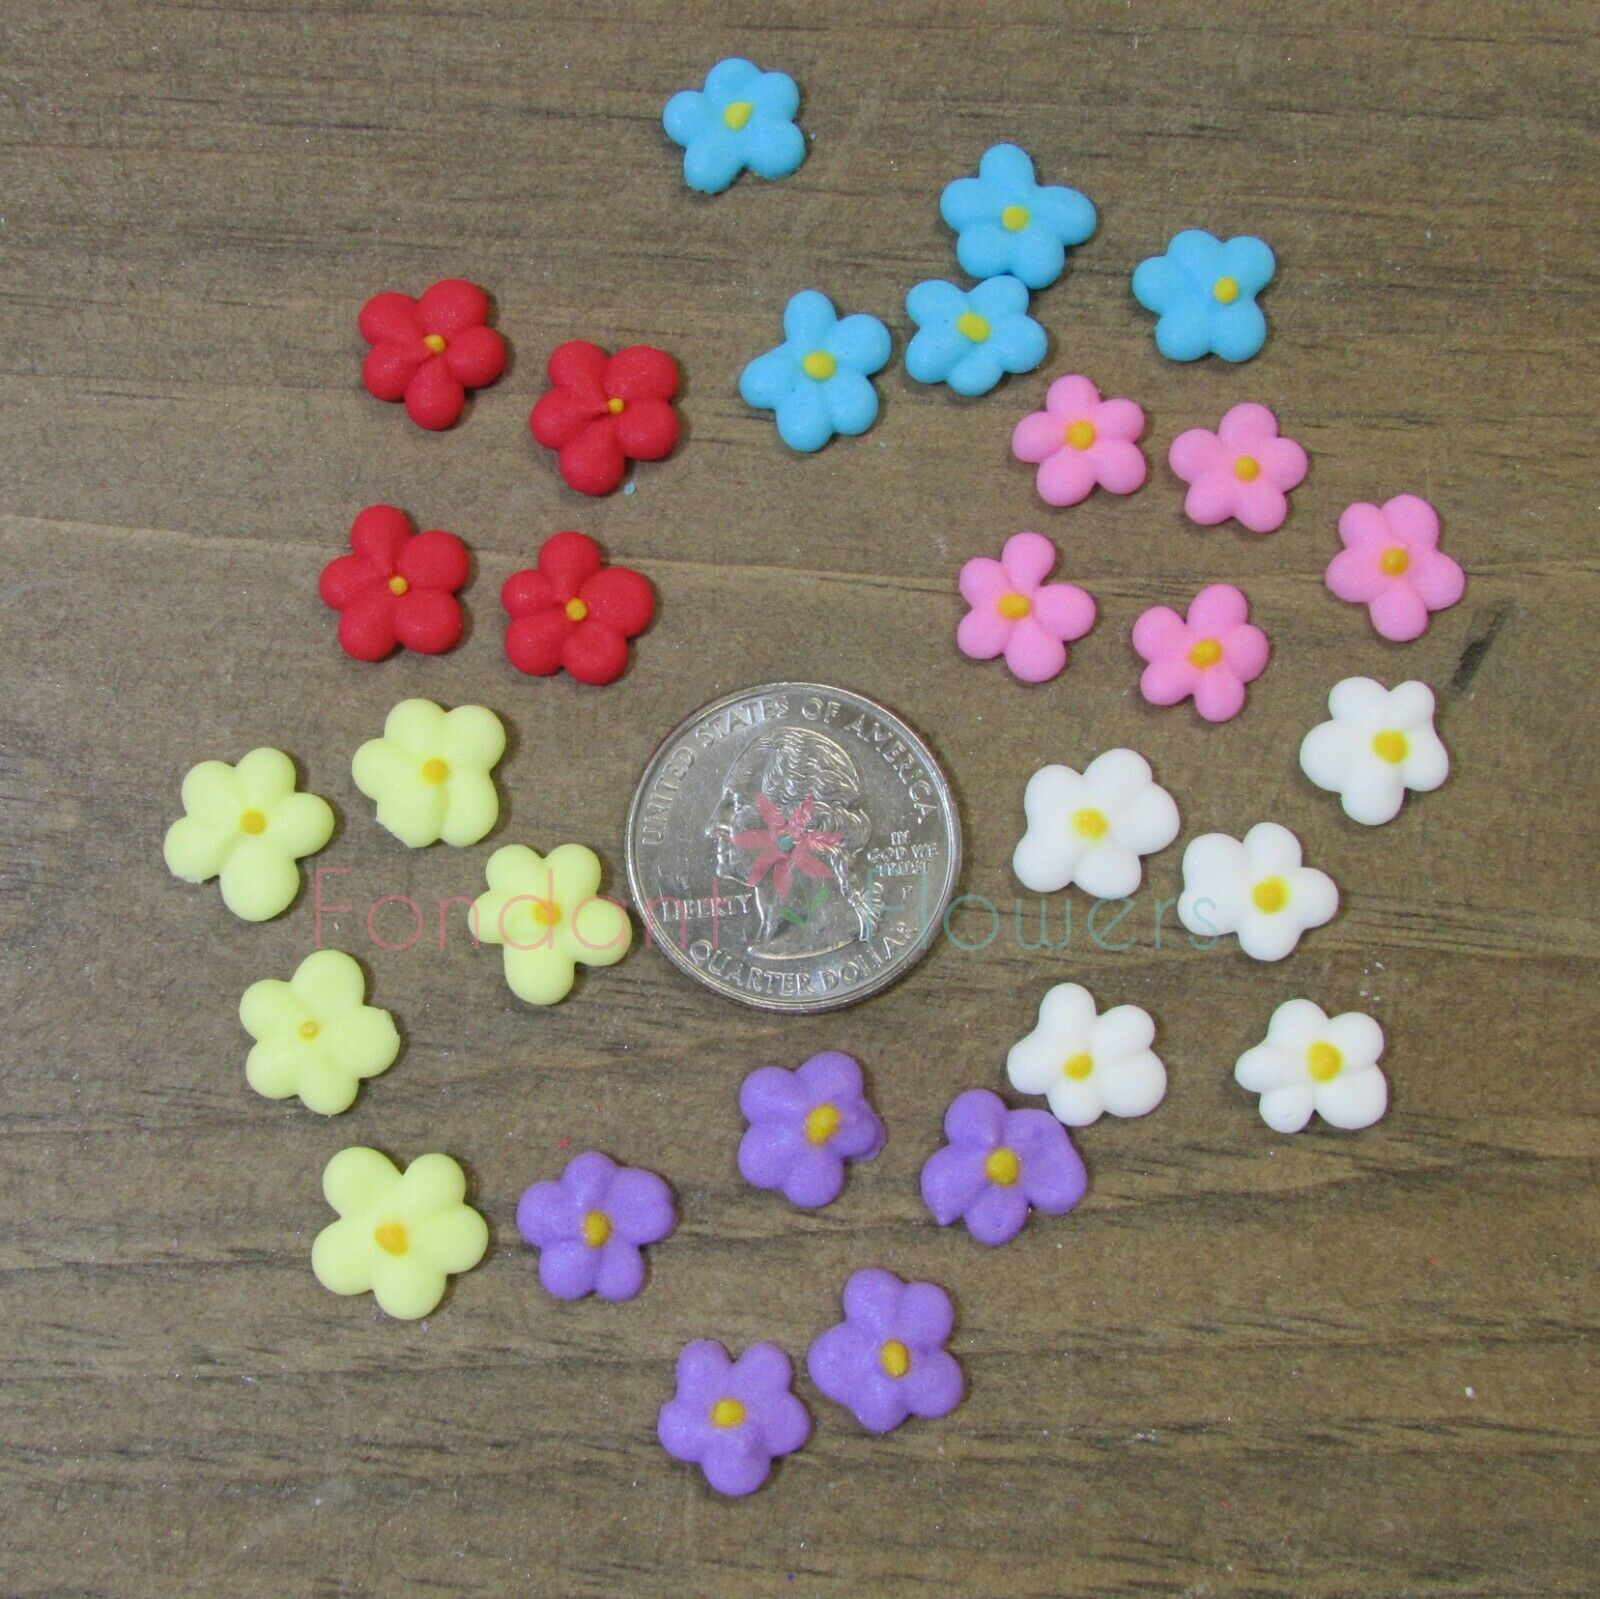 100 Royal Icing Mini Drop Flowers 3/8" For Cupcakes, Cake Pops